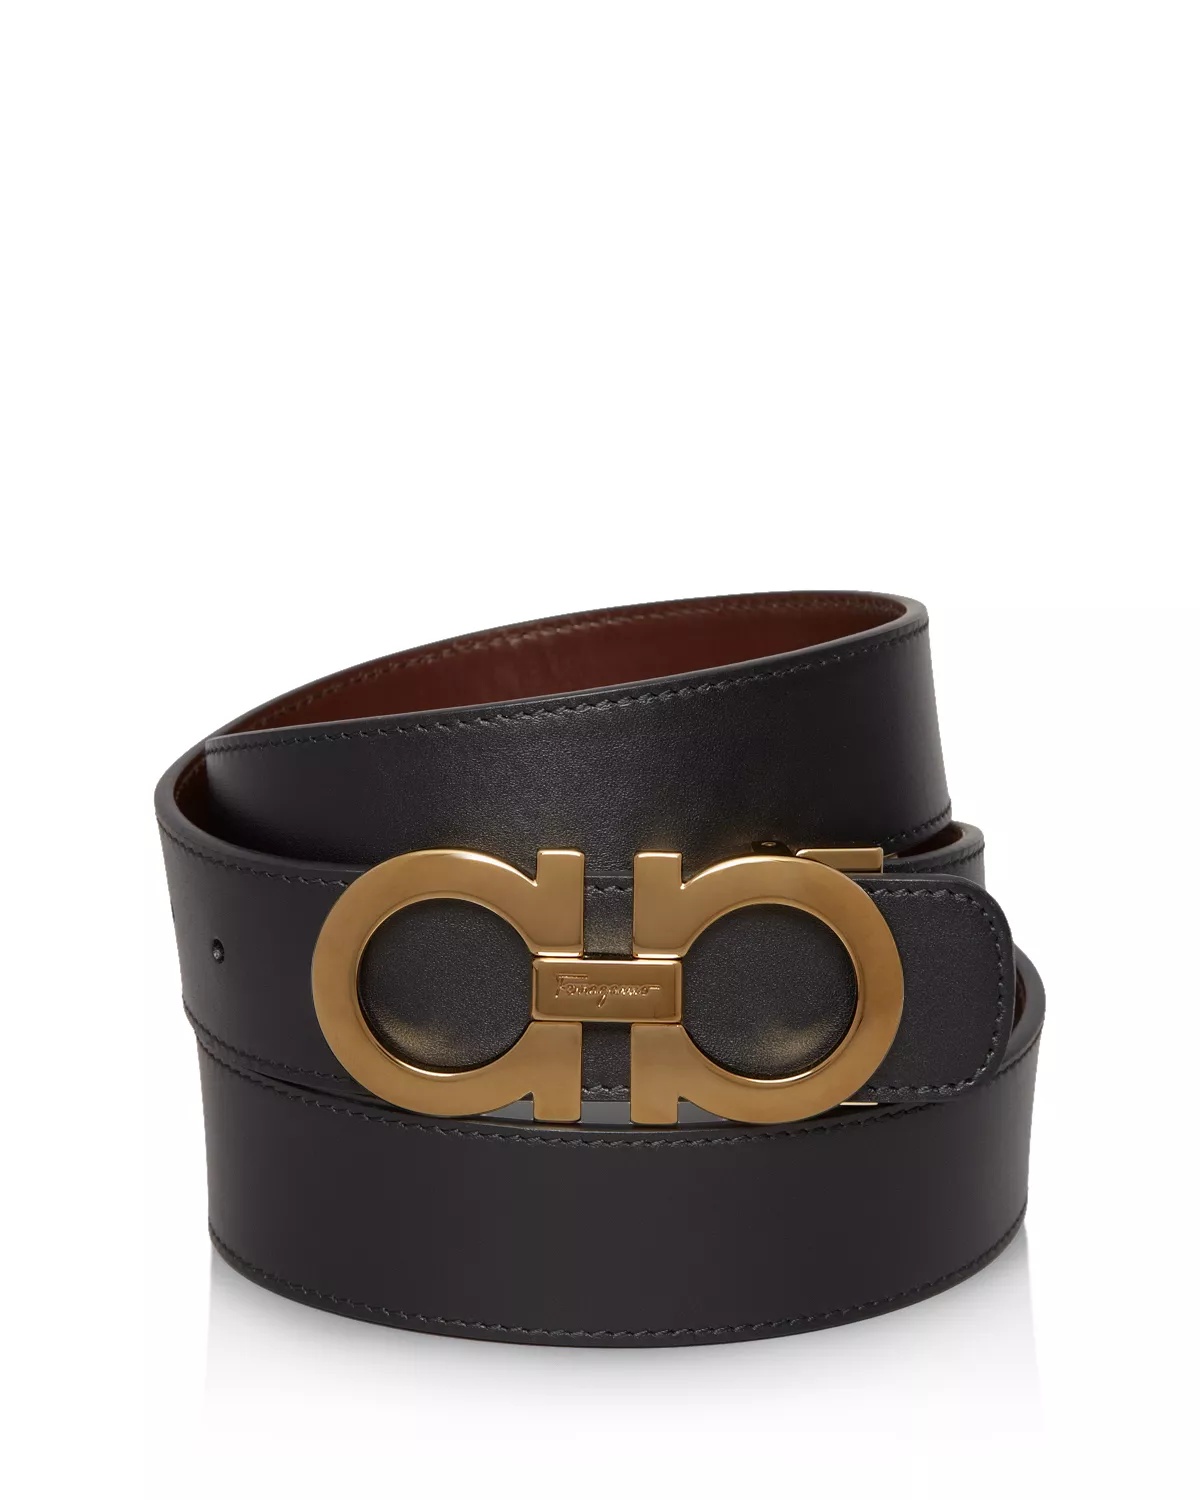 Men's Smooth Reversible Belt with Shiny Goldtone Double Gancini Buckle - 2